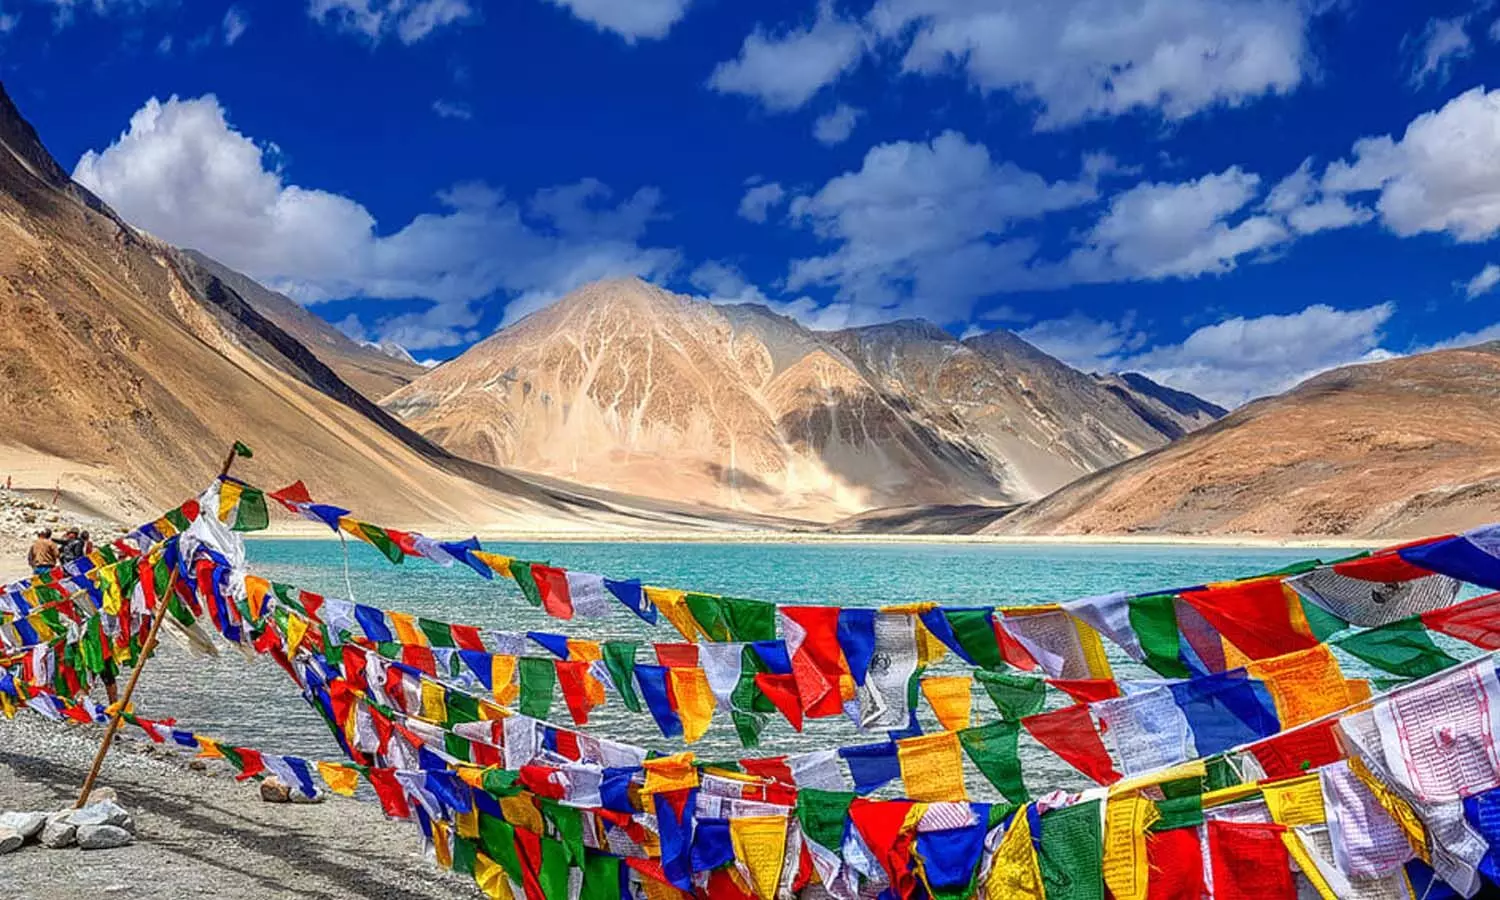 Ladakh will be the new tourism destination of India, the central government has made preparations